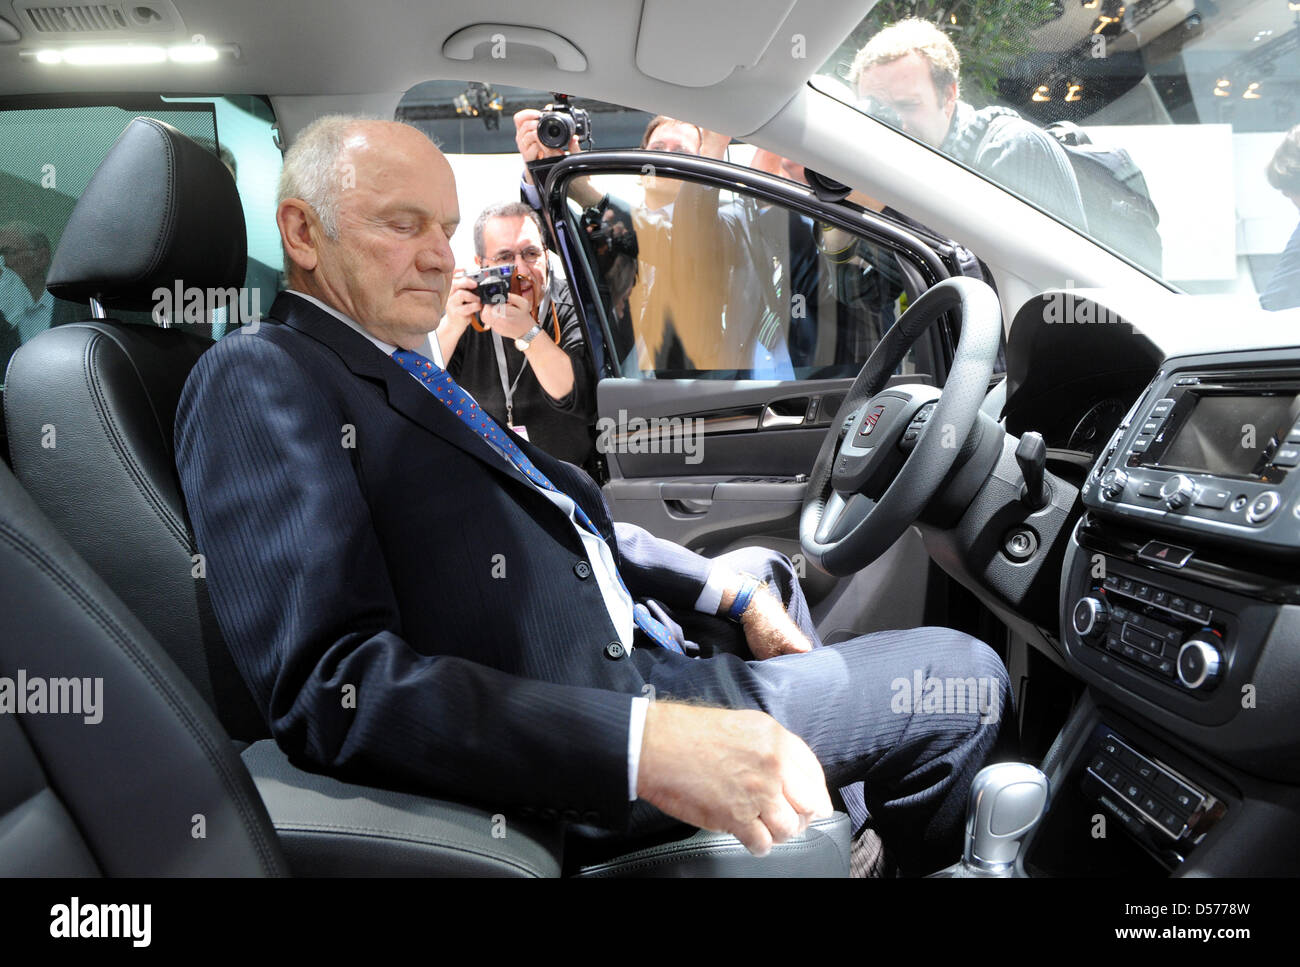 Ferdinand Piech, chairman of the supervisory board of Volkswagen AG, sits in a Seat prior to the general meeting of Volkswagen AG in Hamburg, Germany, 22 April 2010. Europe's largest automaker Volkswagen increased its profits in the first quarter of 2010. The earnings after taxes increased by nearly 95 per cent to 473 million euros, the turnover increased by 19 per cent to 28.6 bil Stock Photo